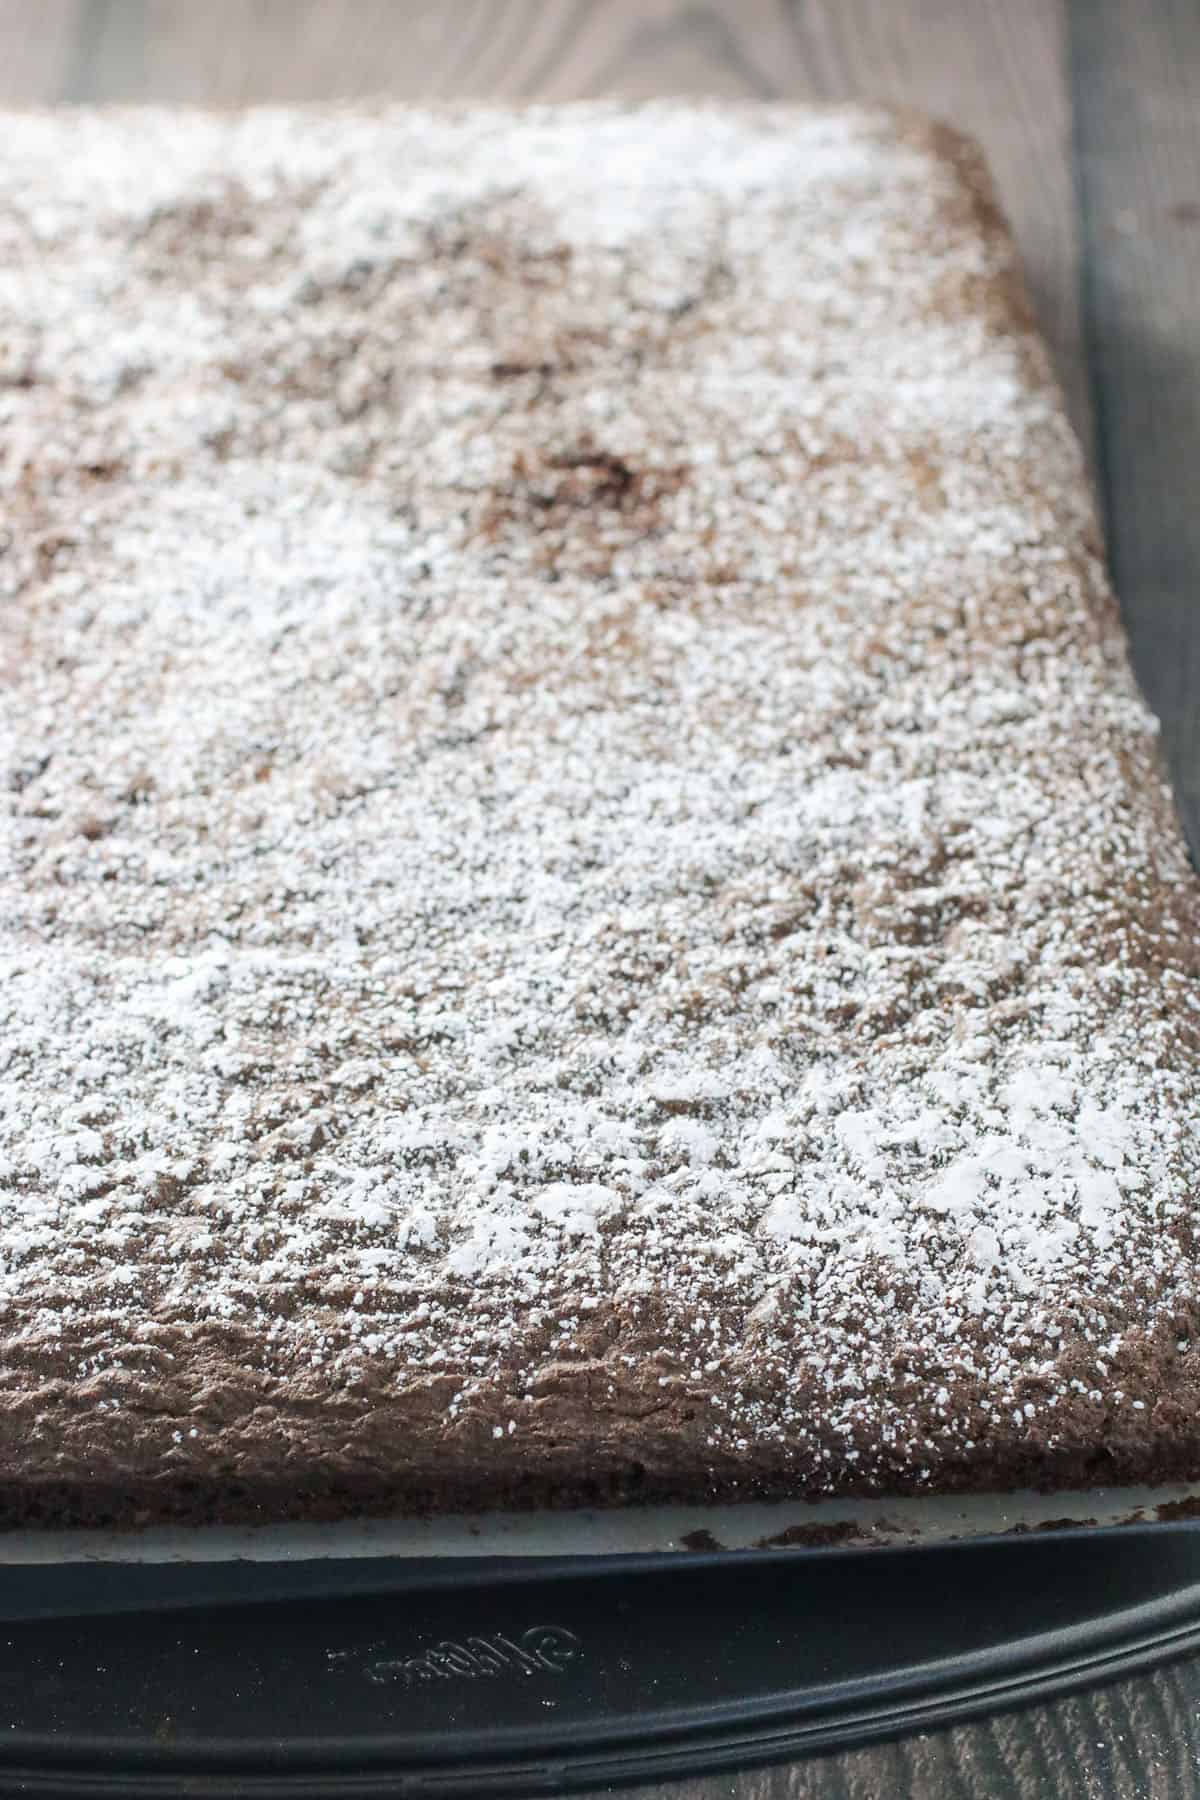 The cake on its right side up with powdered sugar on top. It is now ready for rolling.